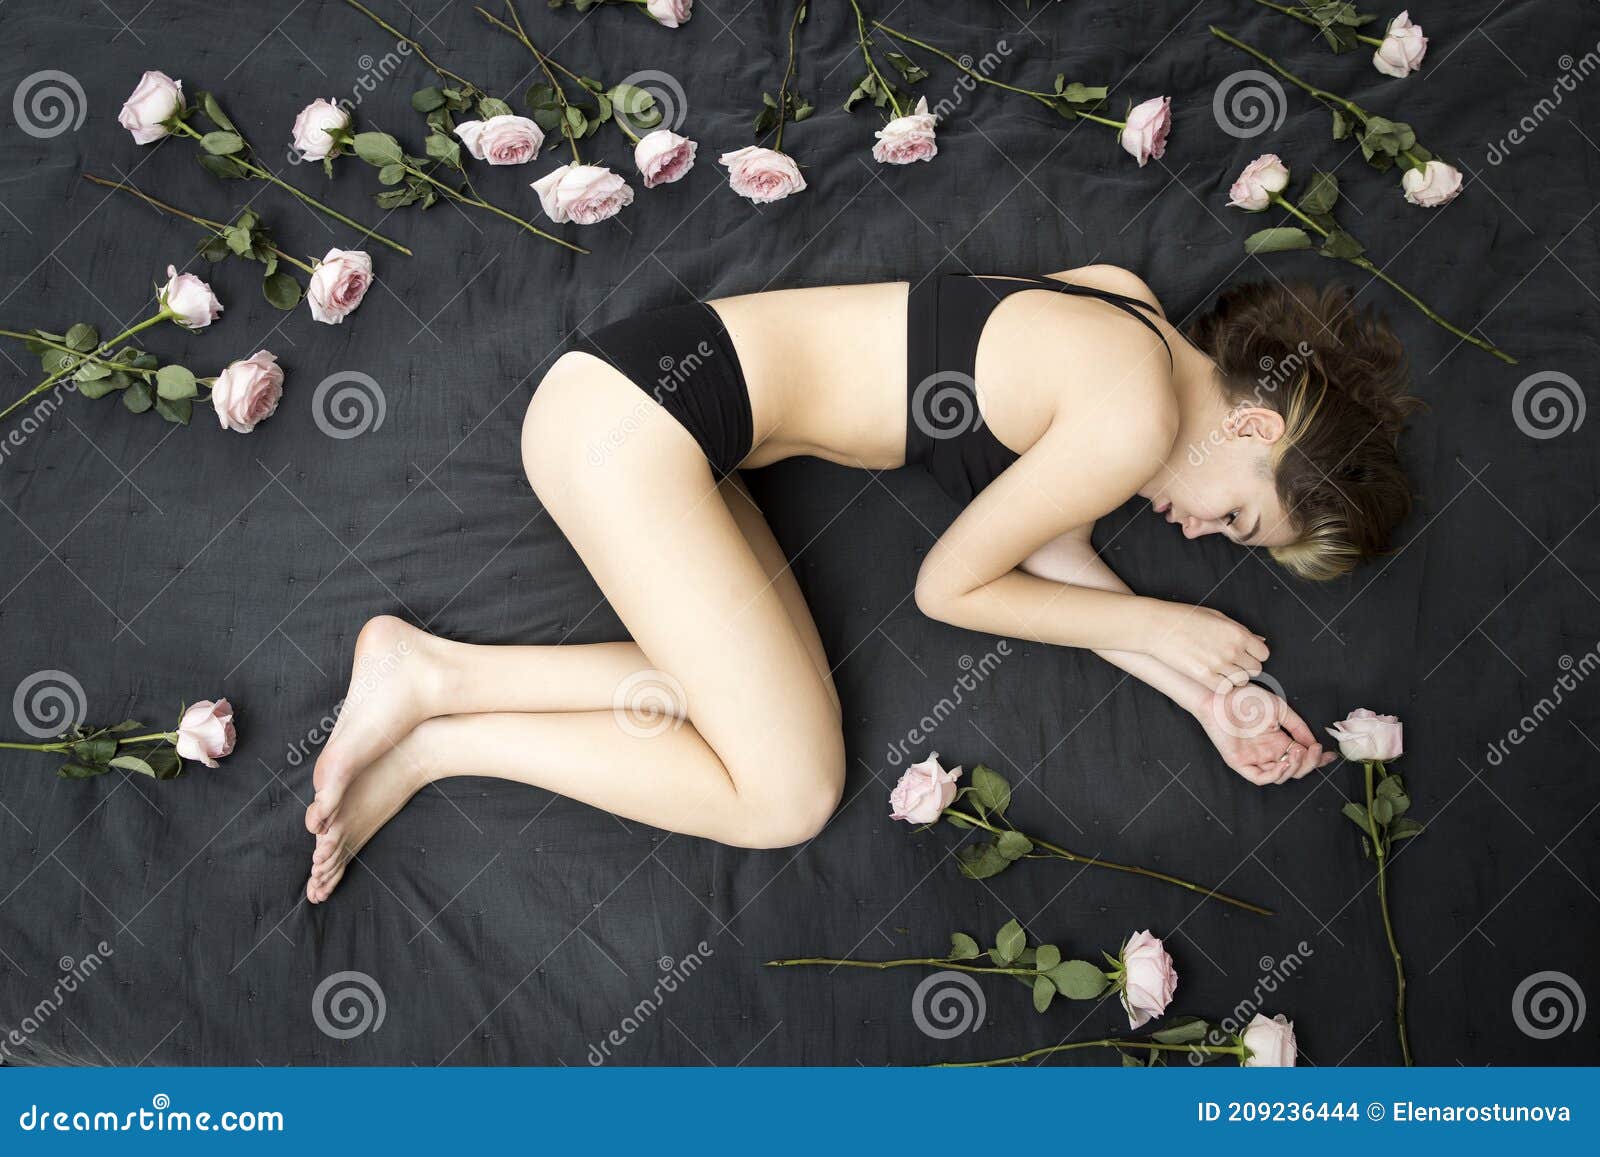 top above view stressed middle aged woman lying on bed in fetal position, embracing knees, suffering from depression or insomnia